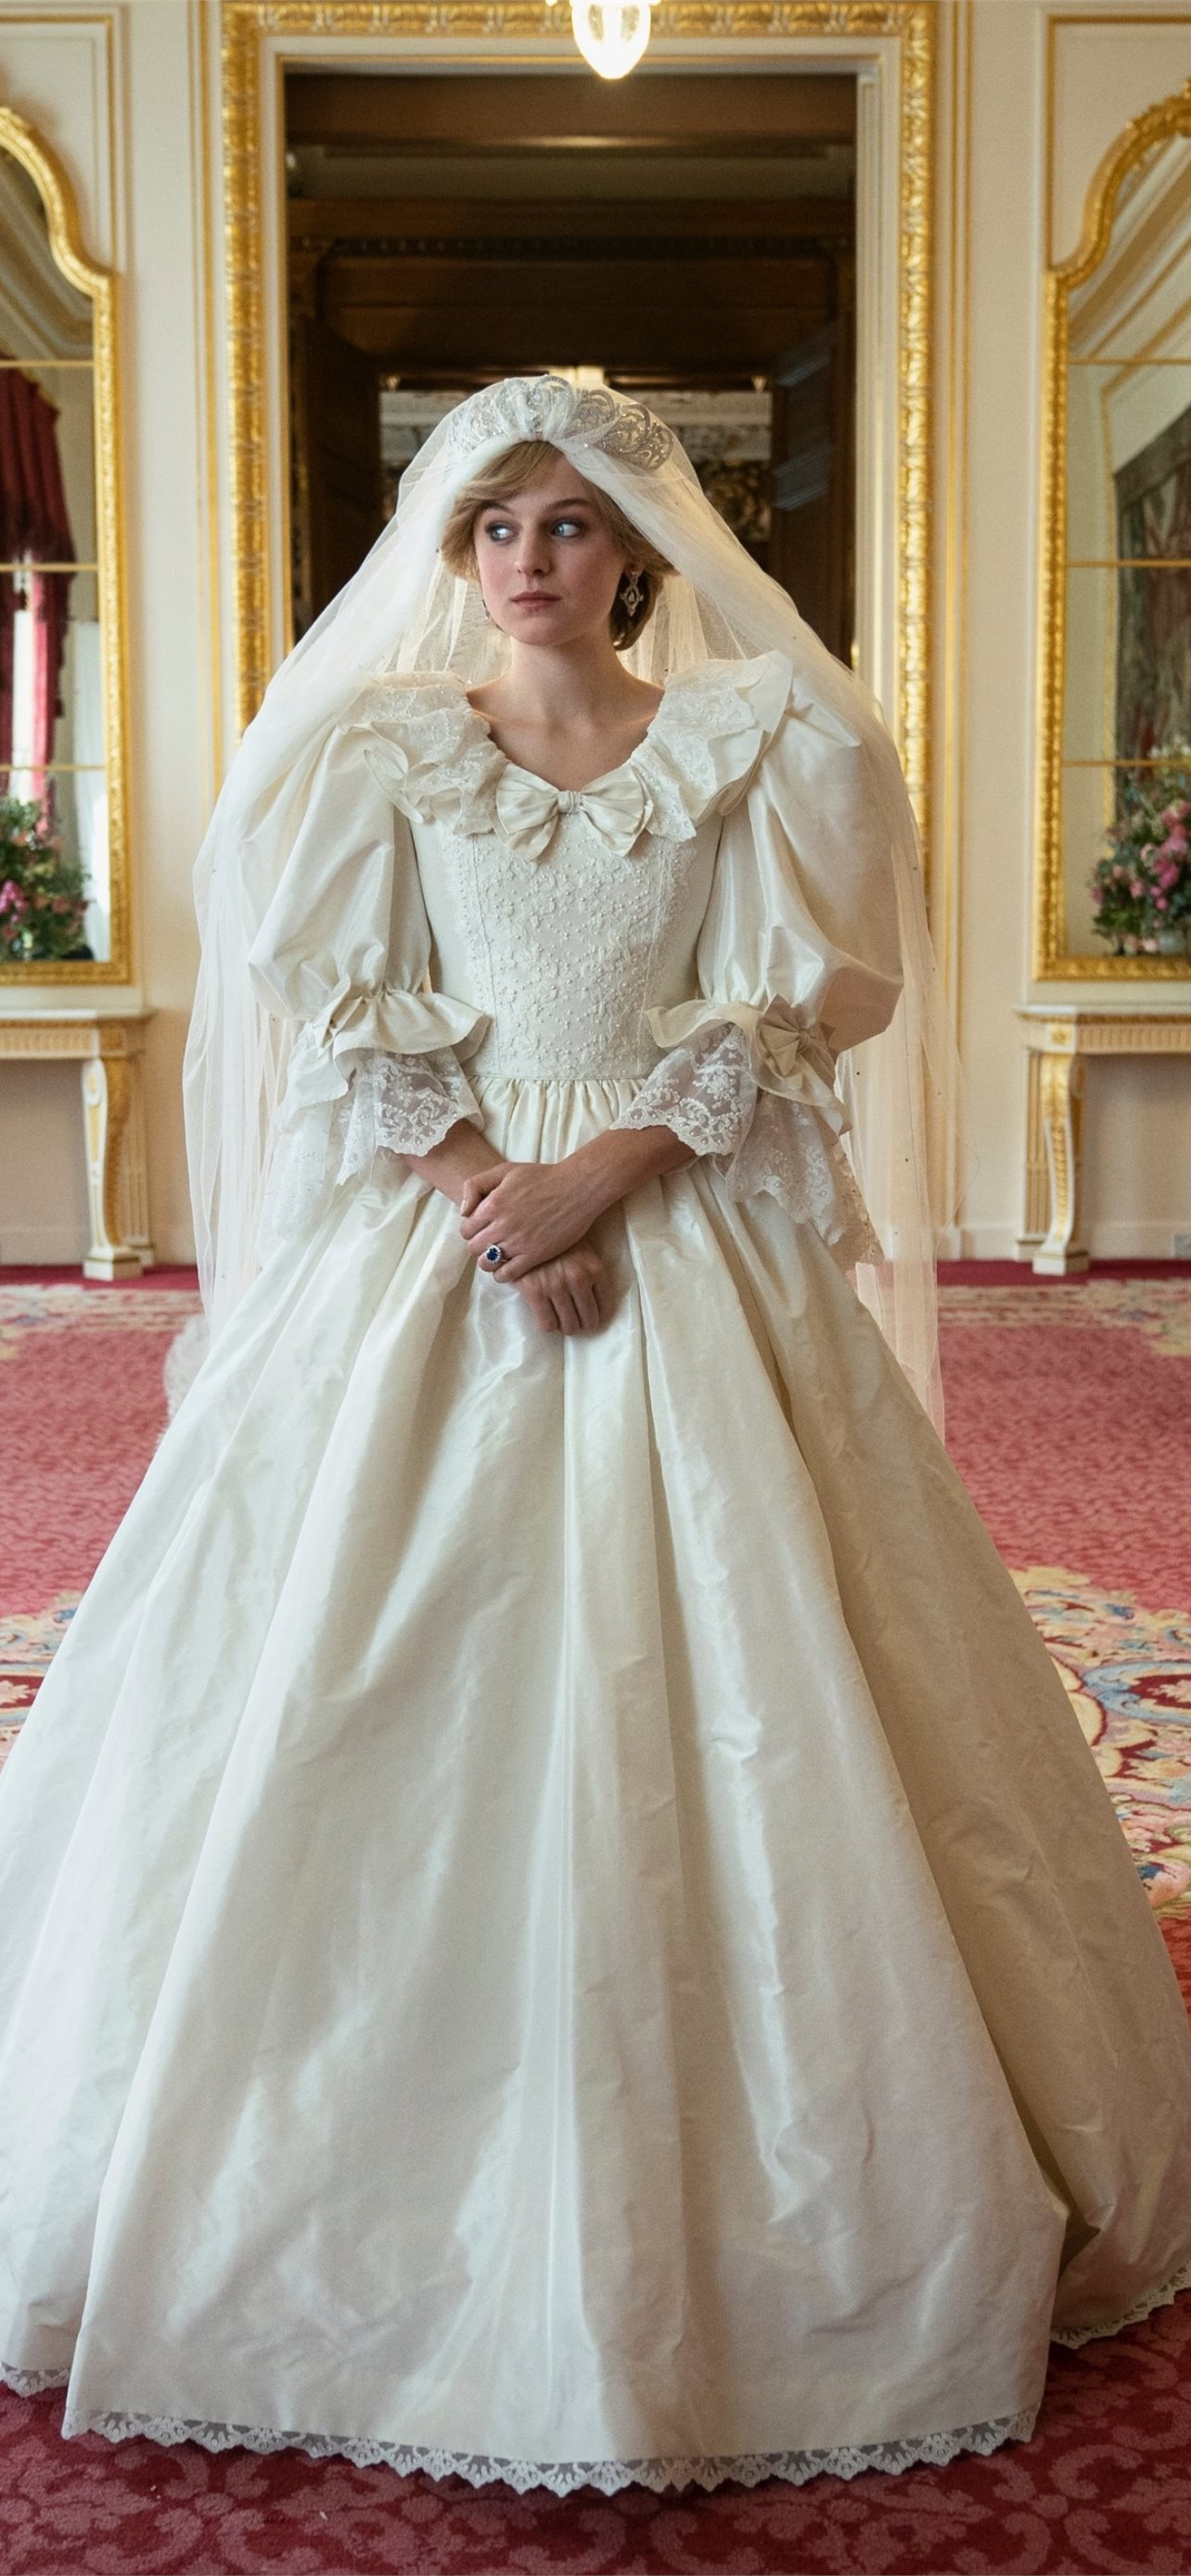 Emma Corrin as Princess Diana Wedding in The Crown. iPhone Wallpaper Free Download